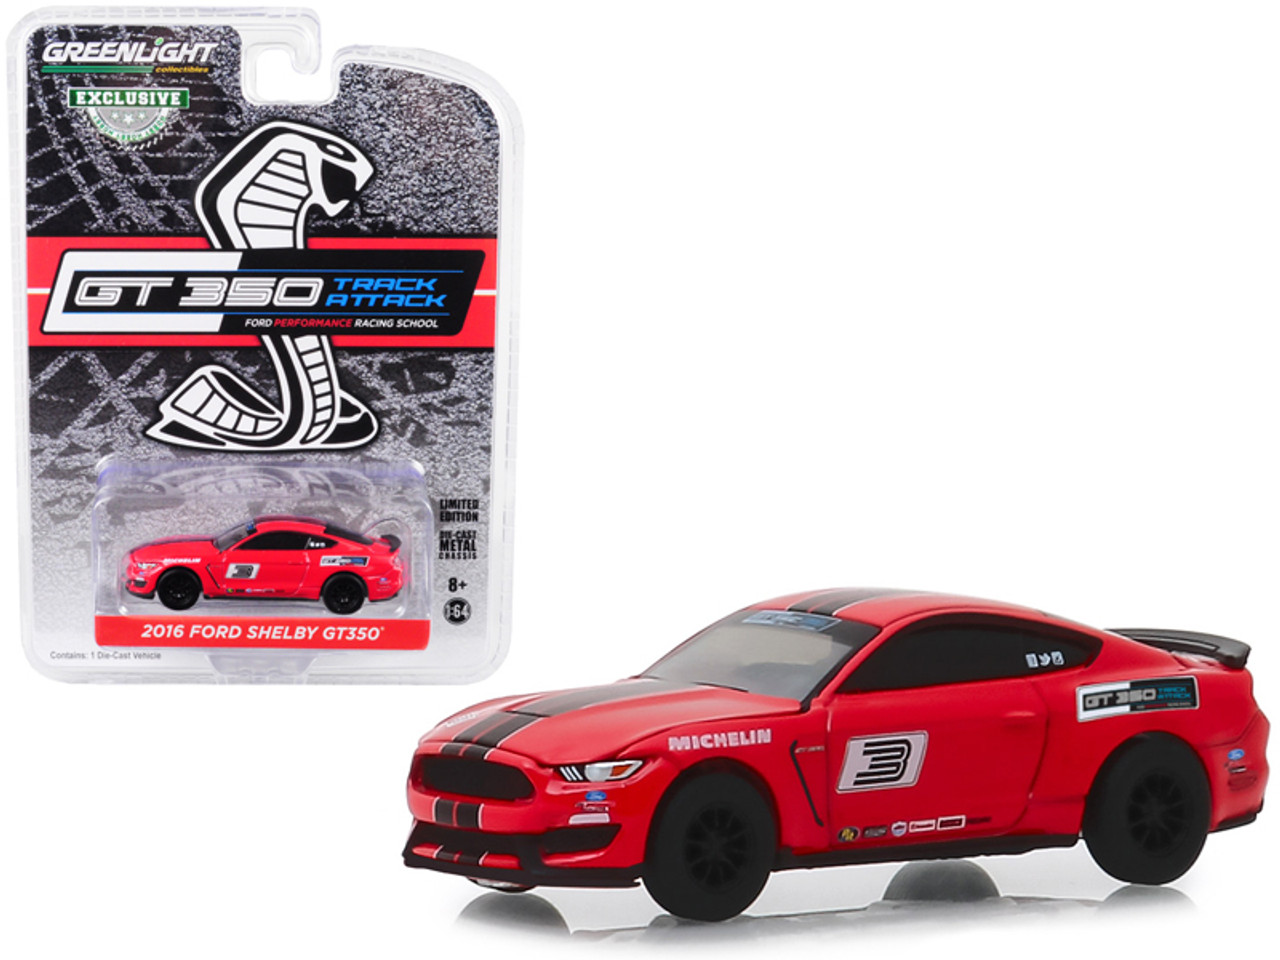 2016 Ford Mustang Shelby GT350 #3 Race Red with Black Stripes "Ford Performance Racing School" GT350 Track Attack "Hobby Exclusive" 1/64 Diecast Model Car by Greenlight